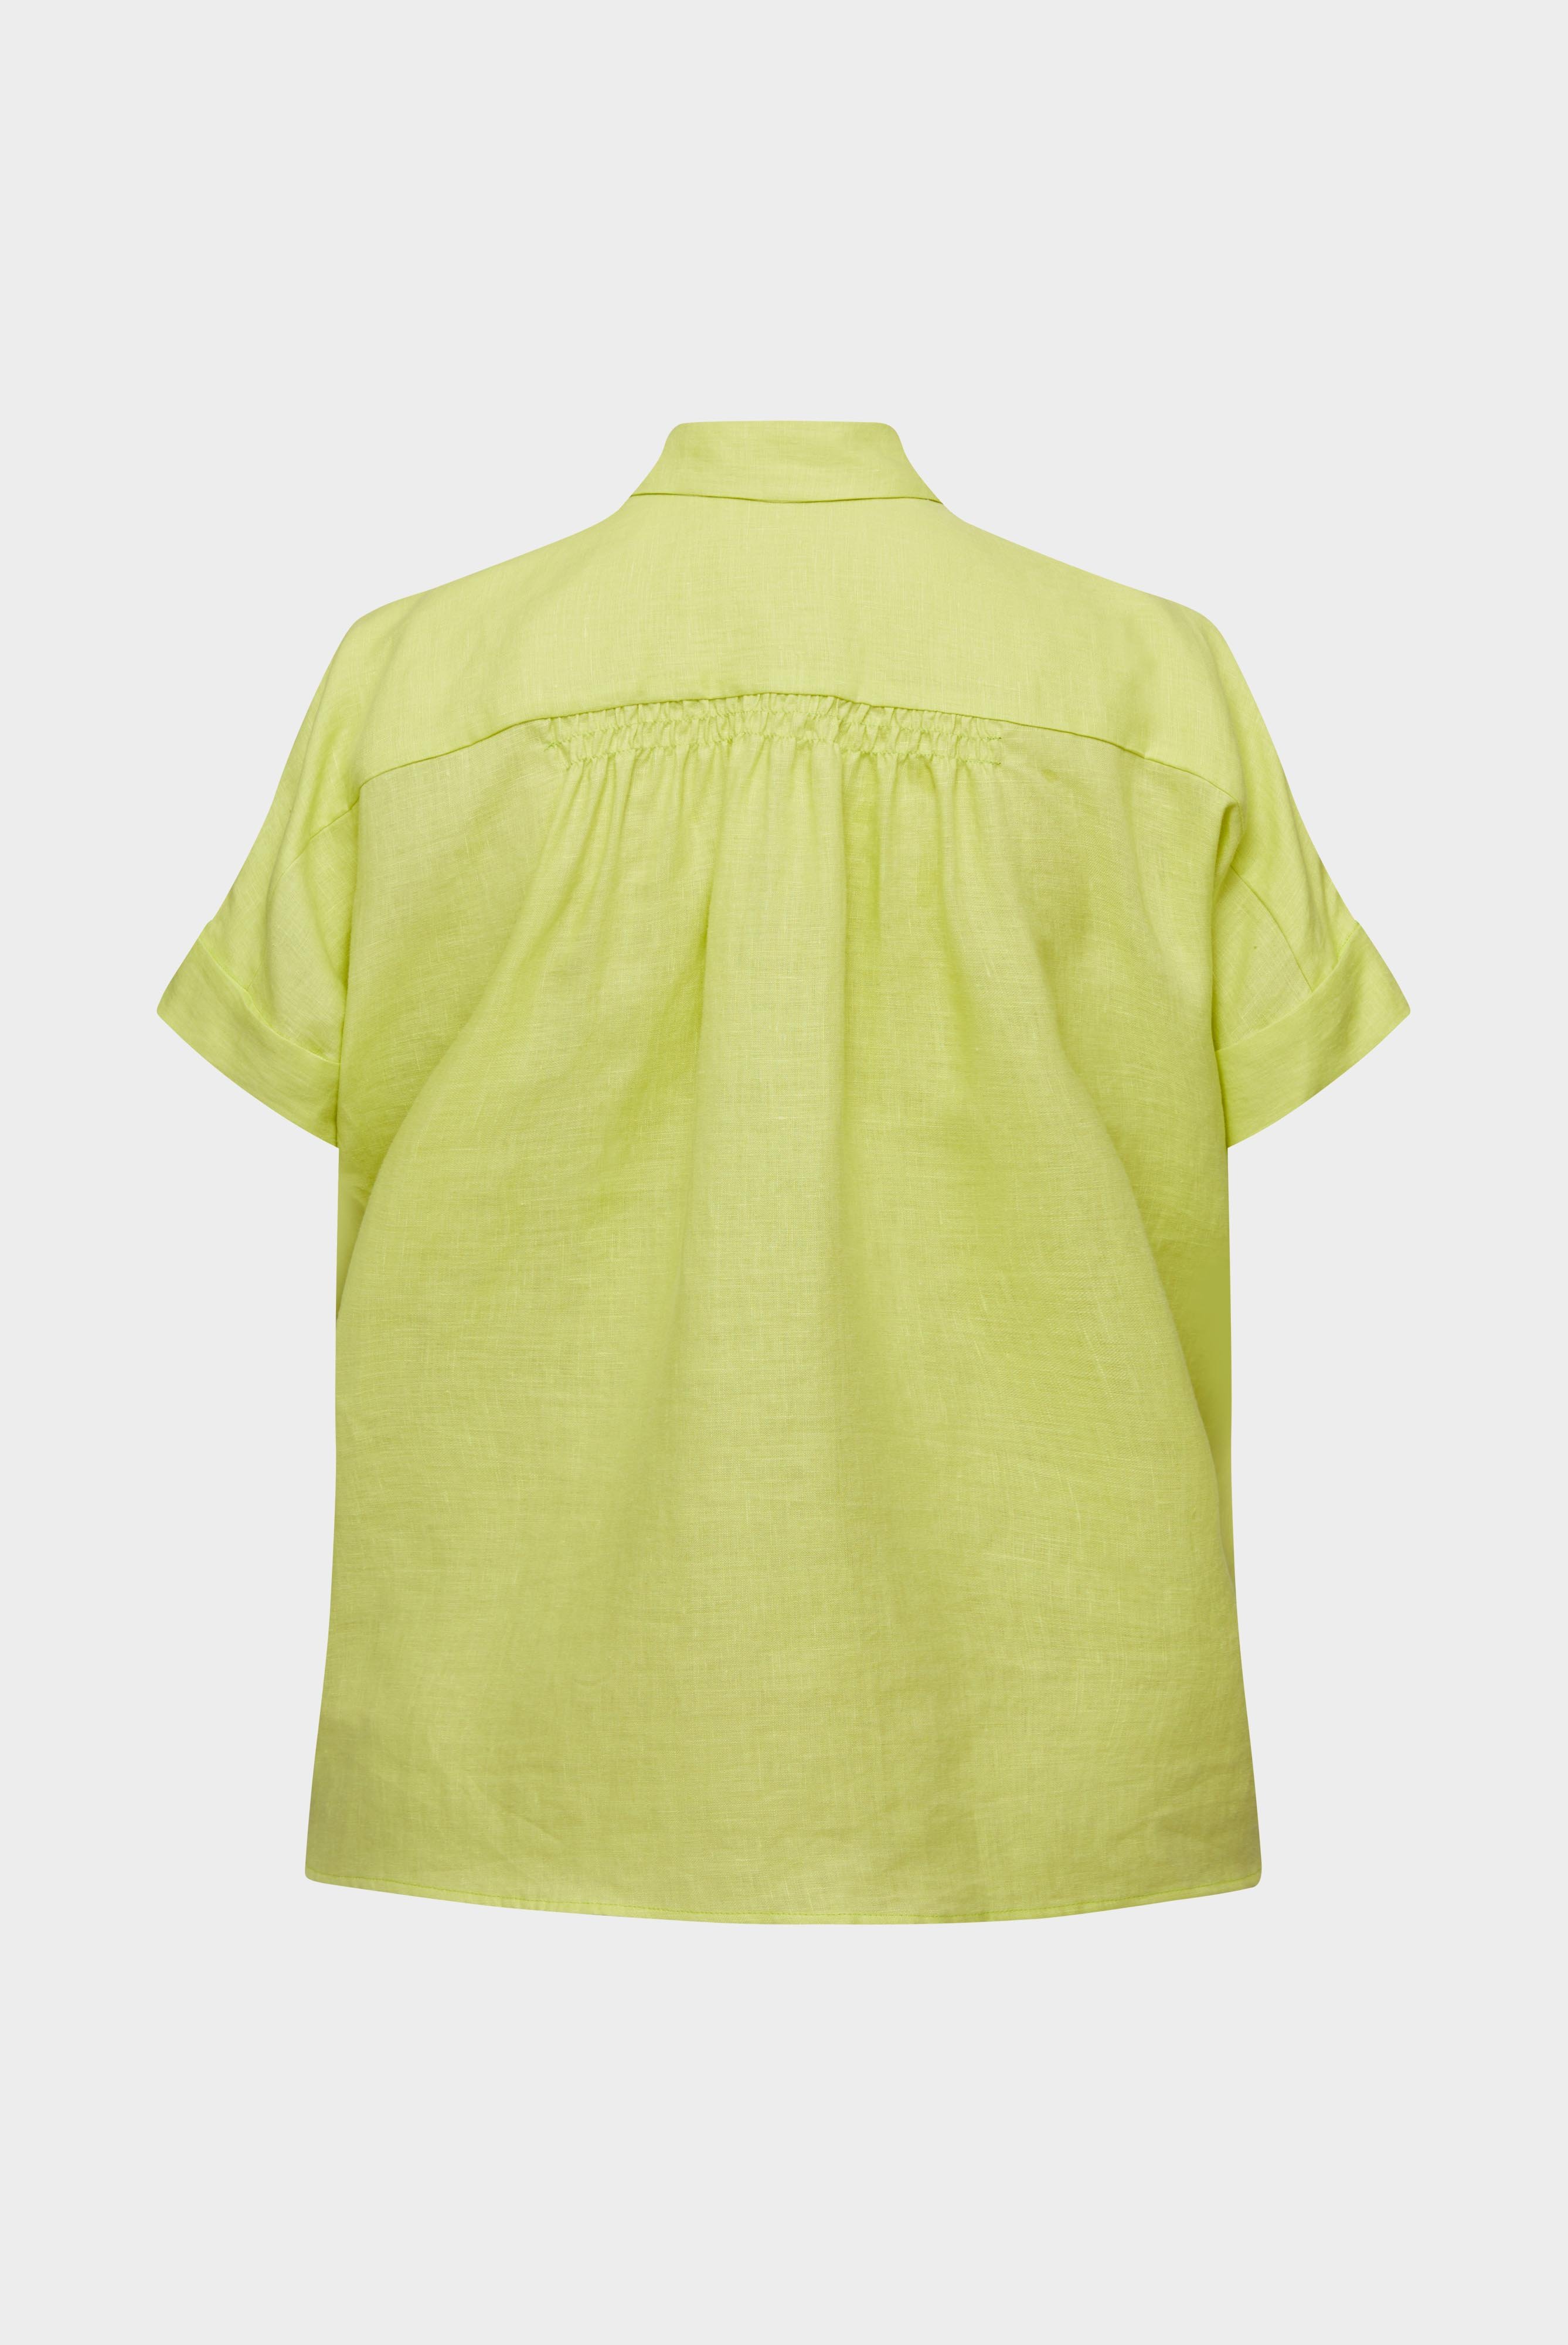 Casual Blouses+Short-Sleeved Blouse made of Upper Linen+05.525R.P8.150555.930.34